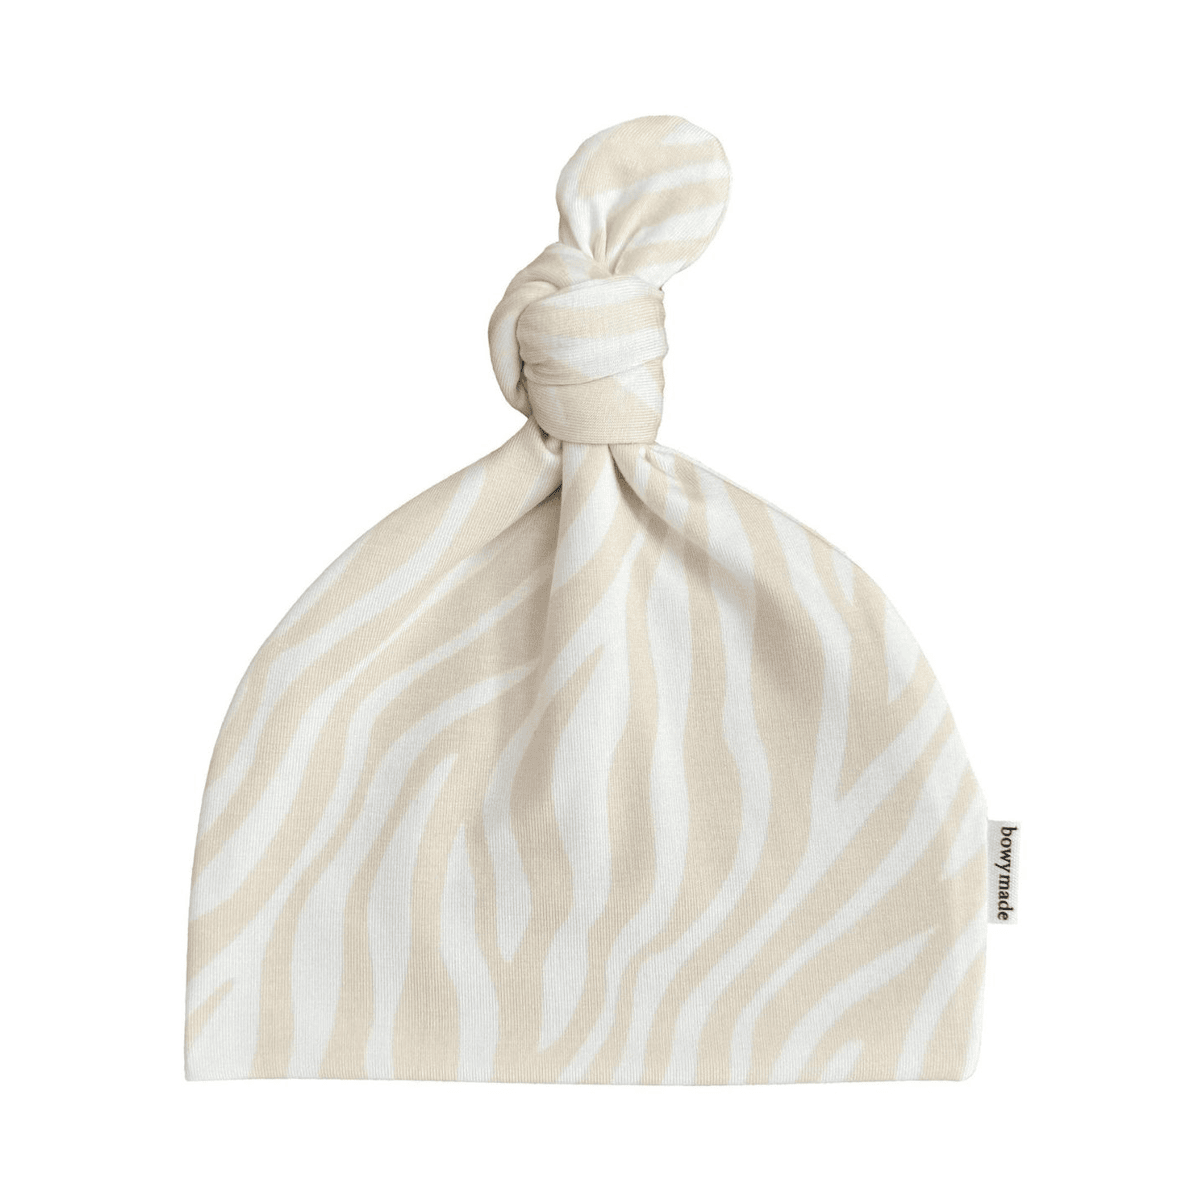 Bowy Made SoftLuve Top Knot Beanie - WildeBowy Made SoftLuve Top Knot Beanie - Wilde